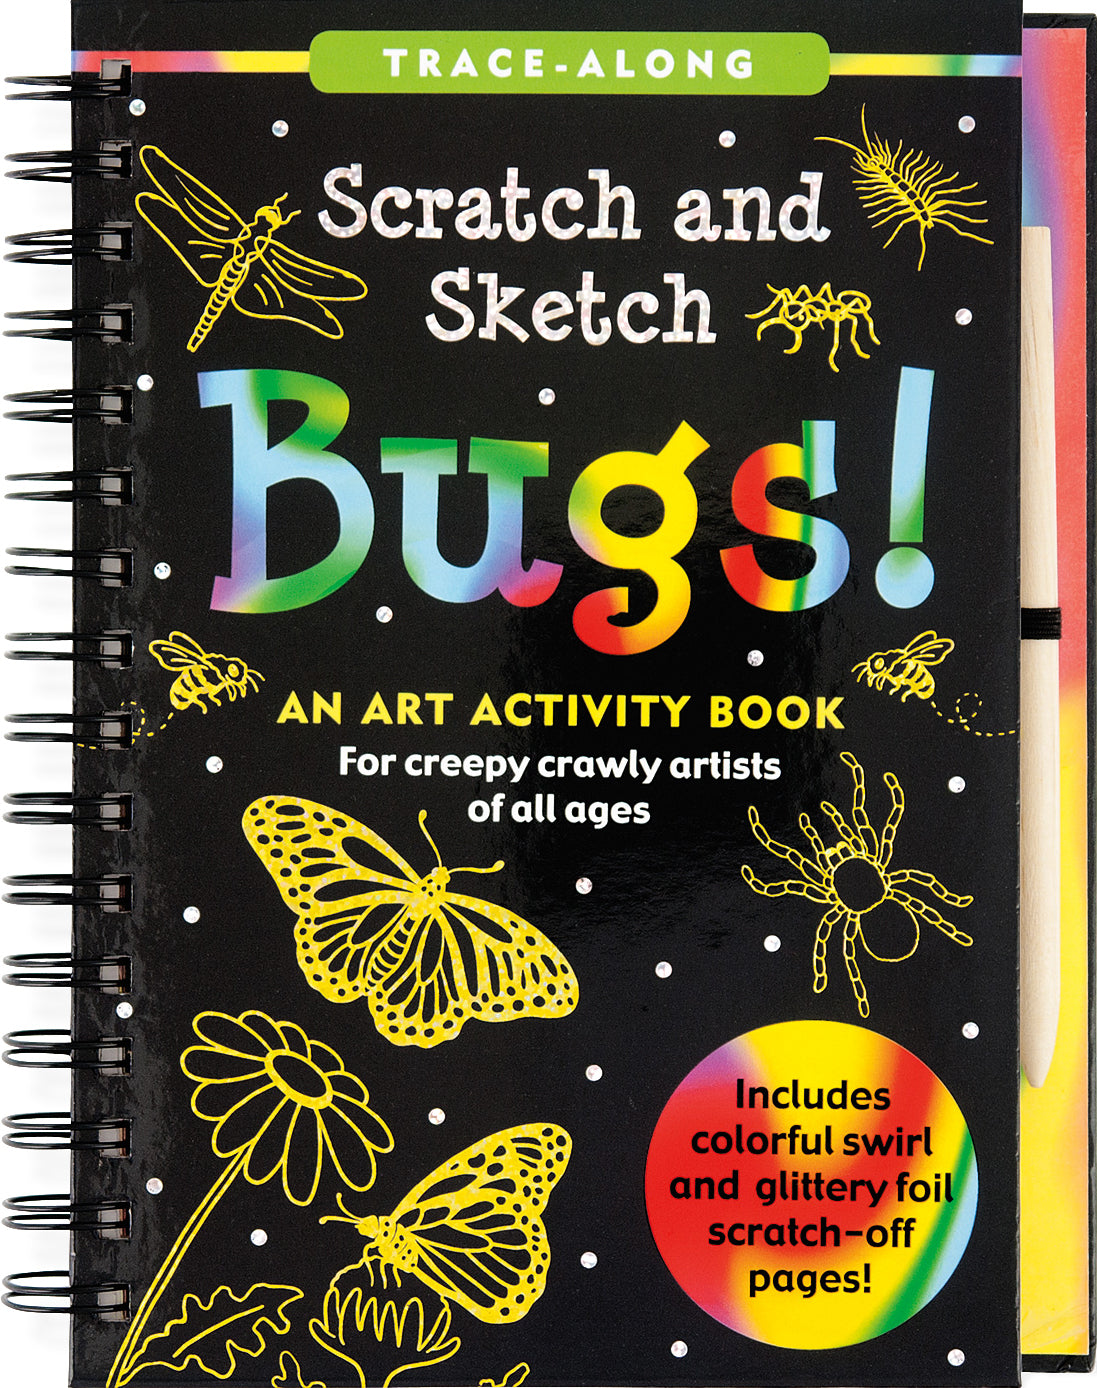 Scratch and Sketch | Bugs Kaboodles Toy Store - Victoria